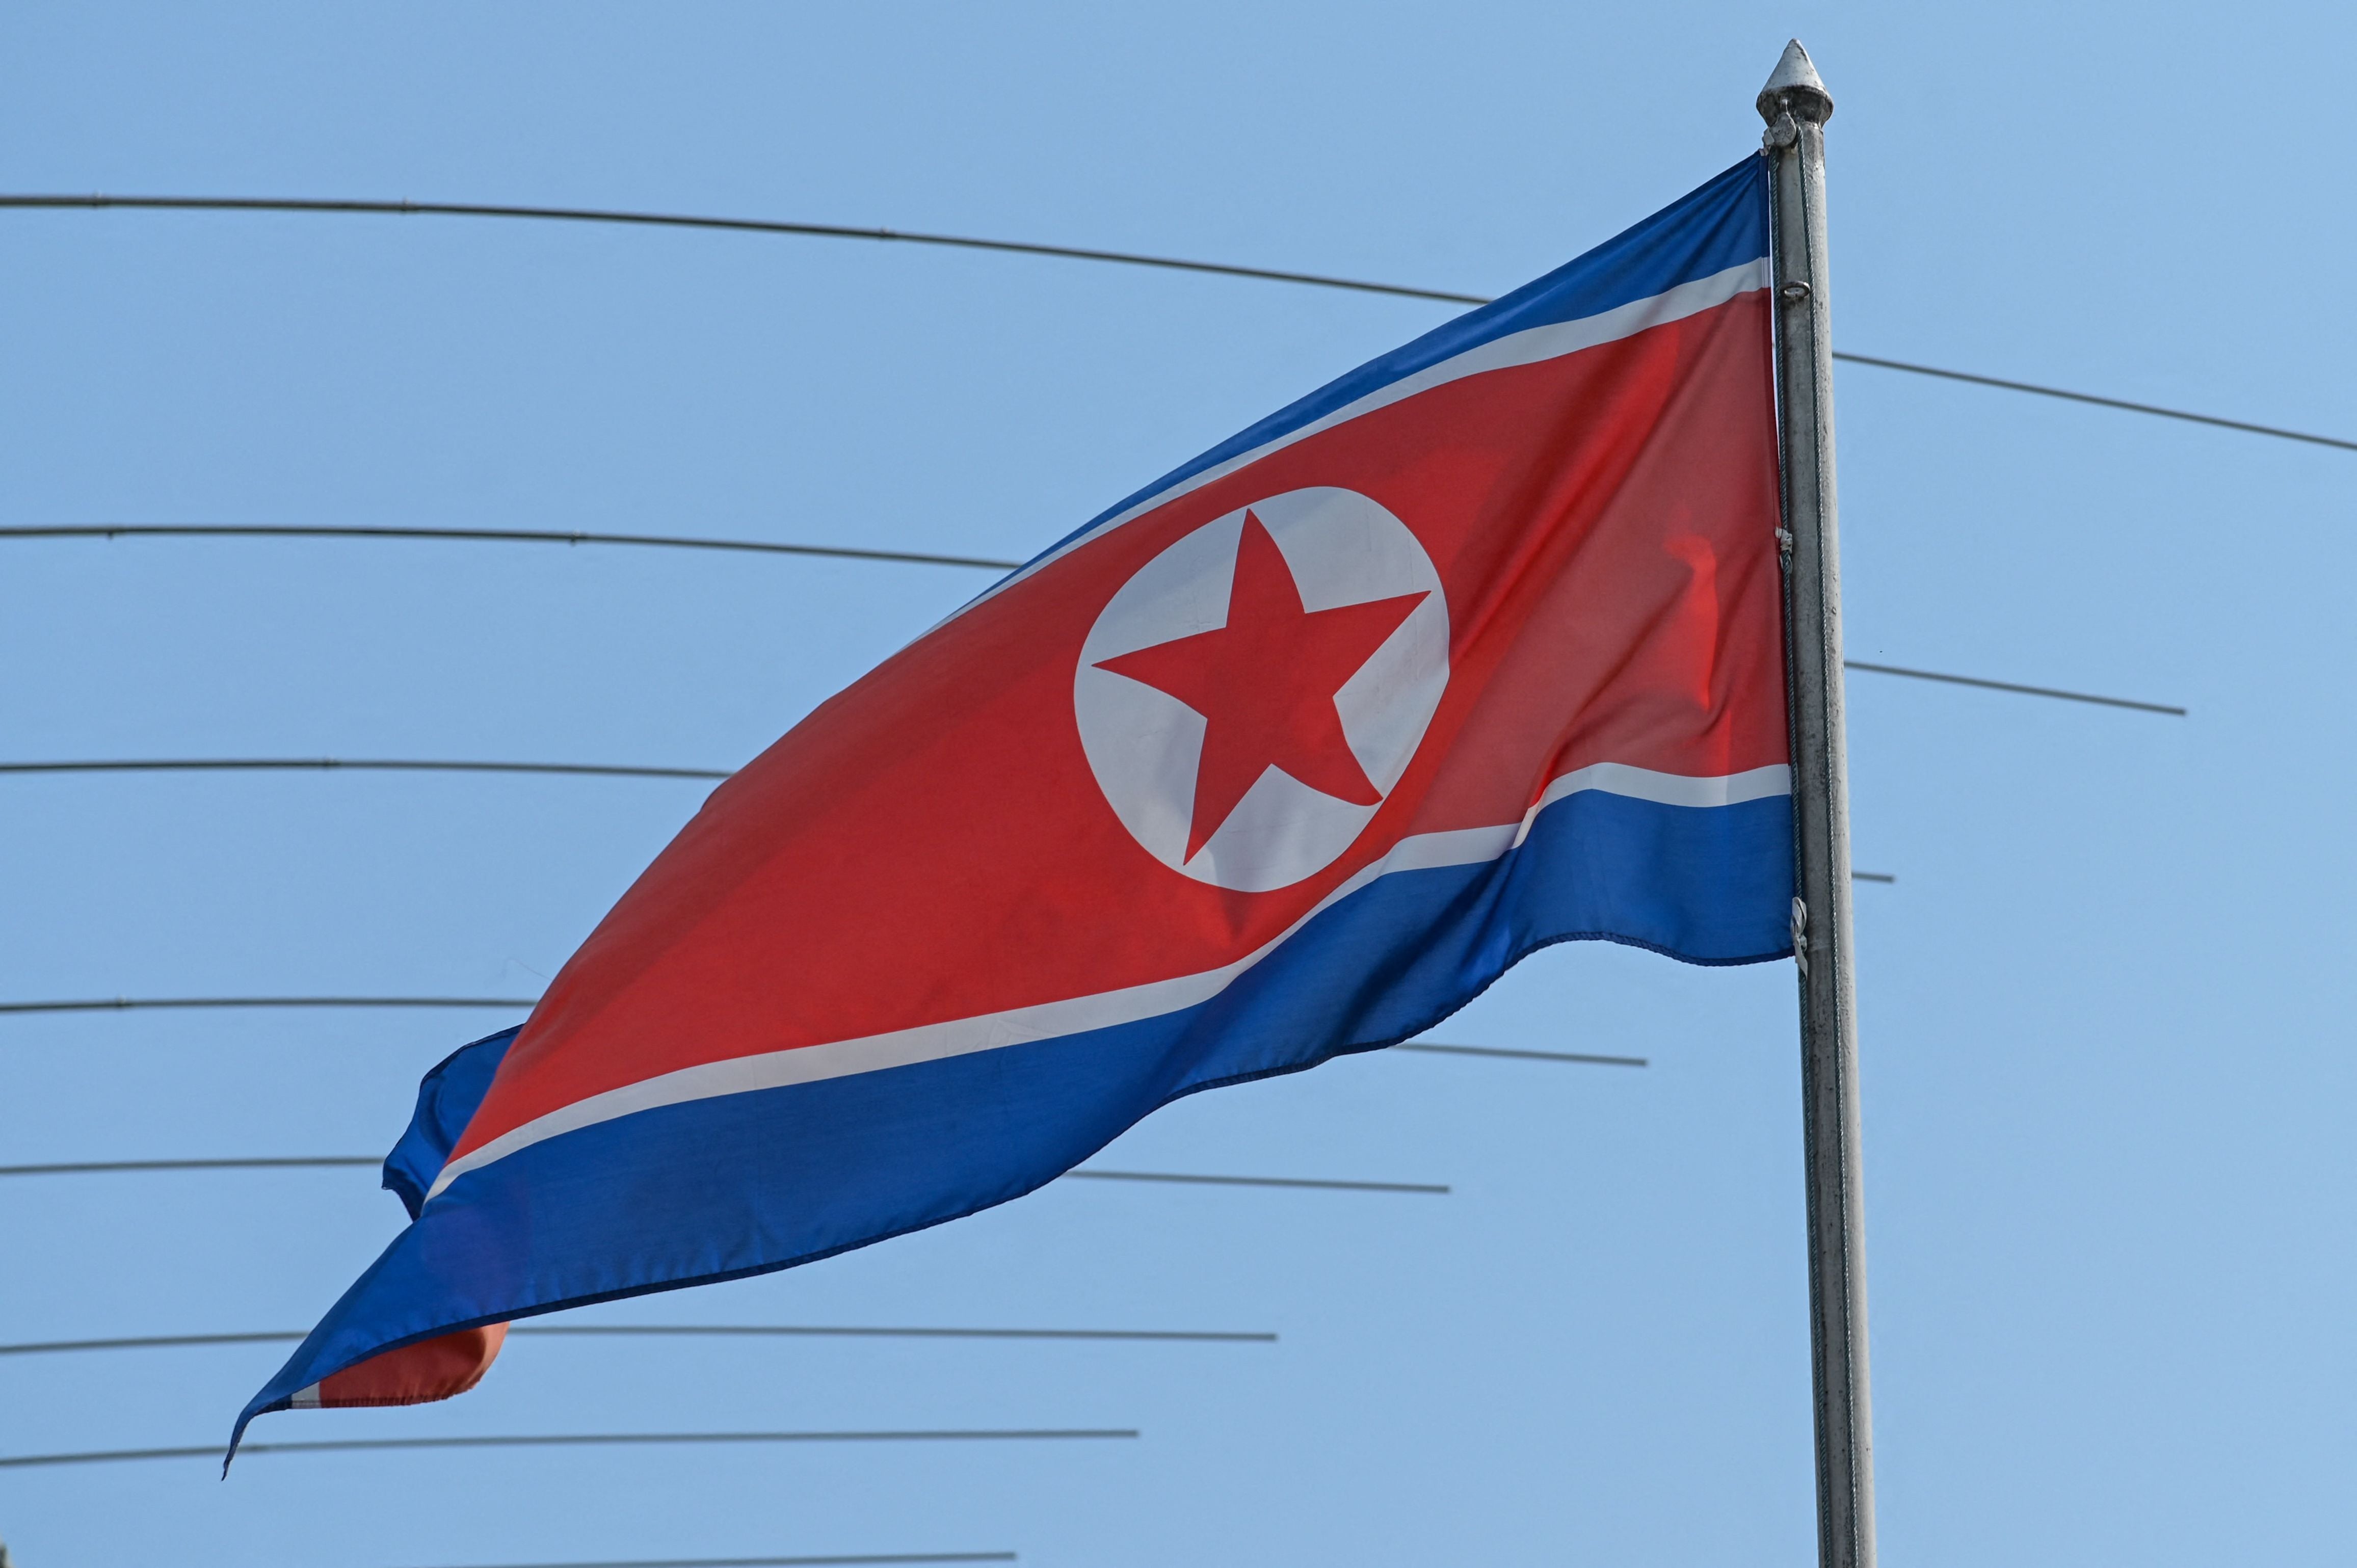 The North Korean flag seen in the country’s embassy in Kuala Lumpur on 19 March, 2021